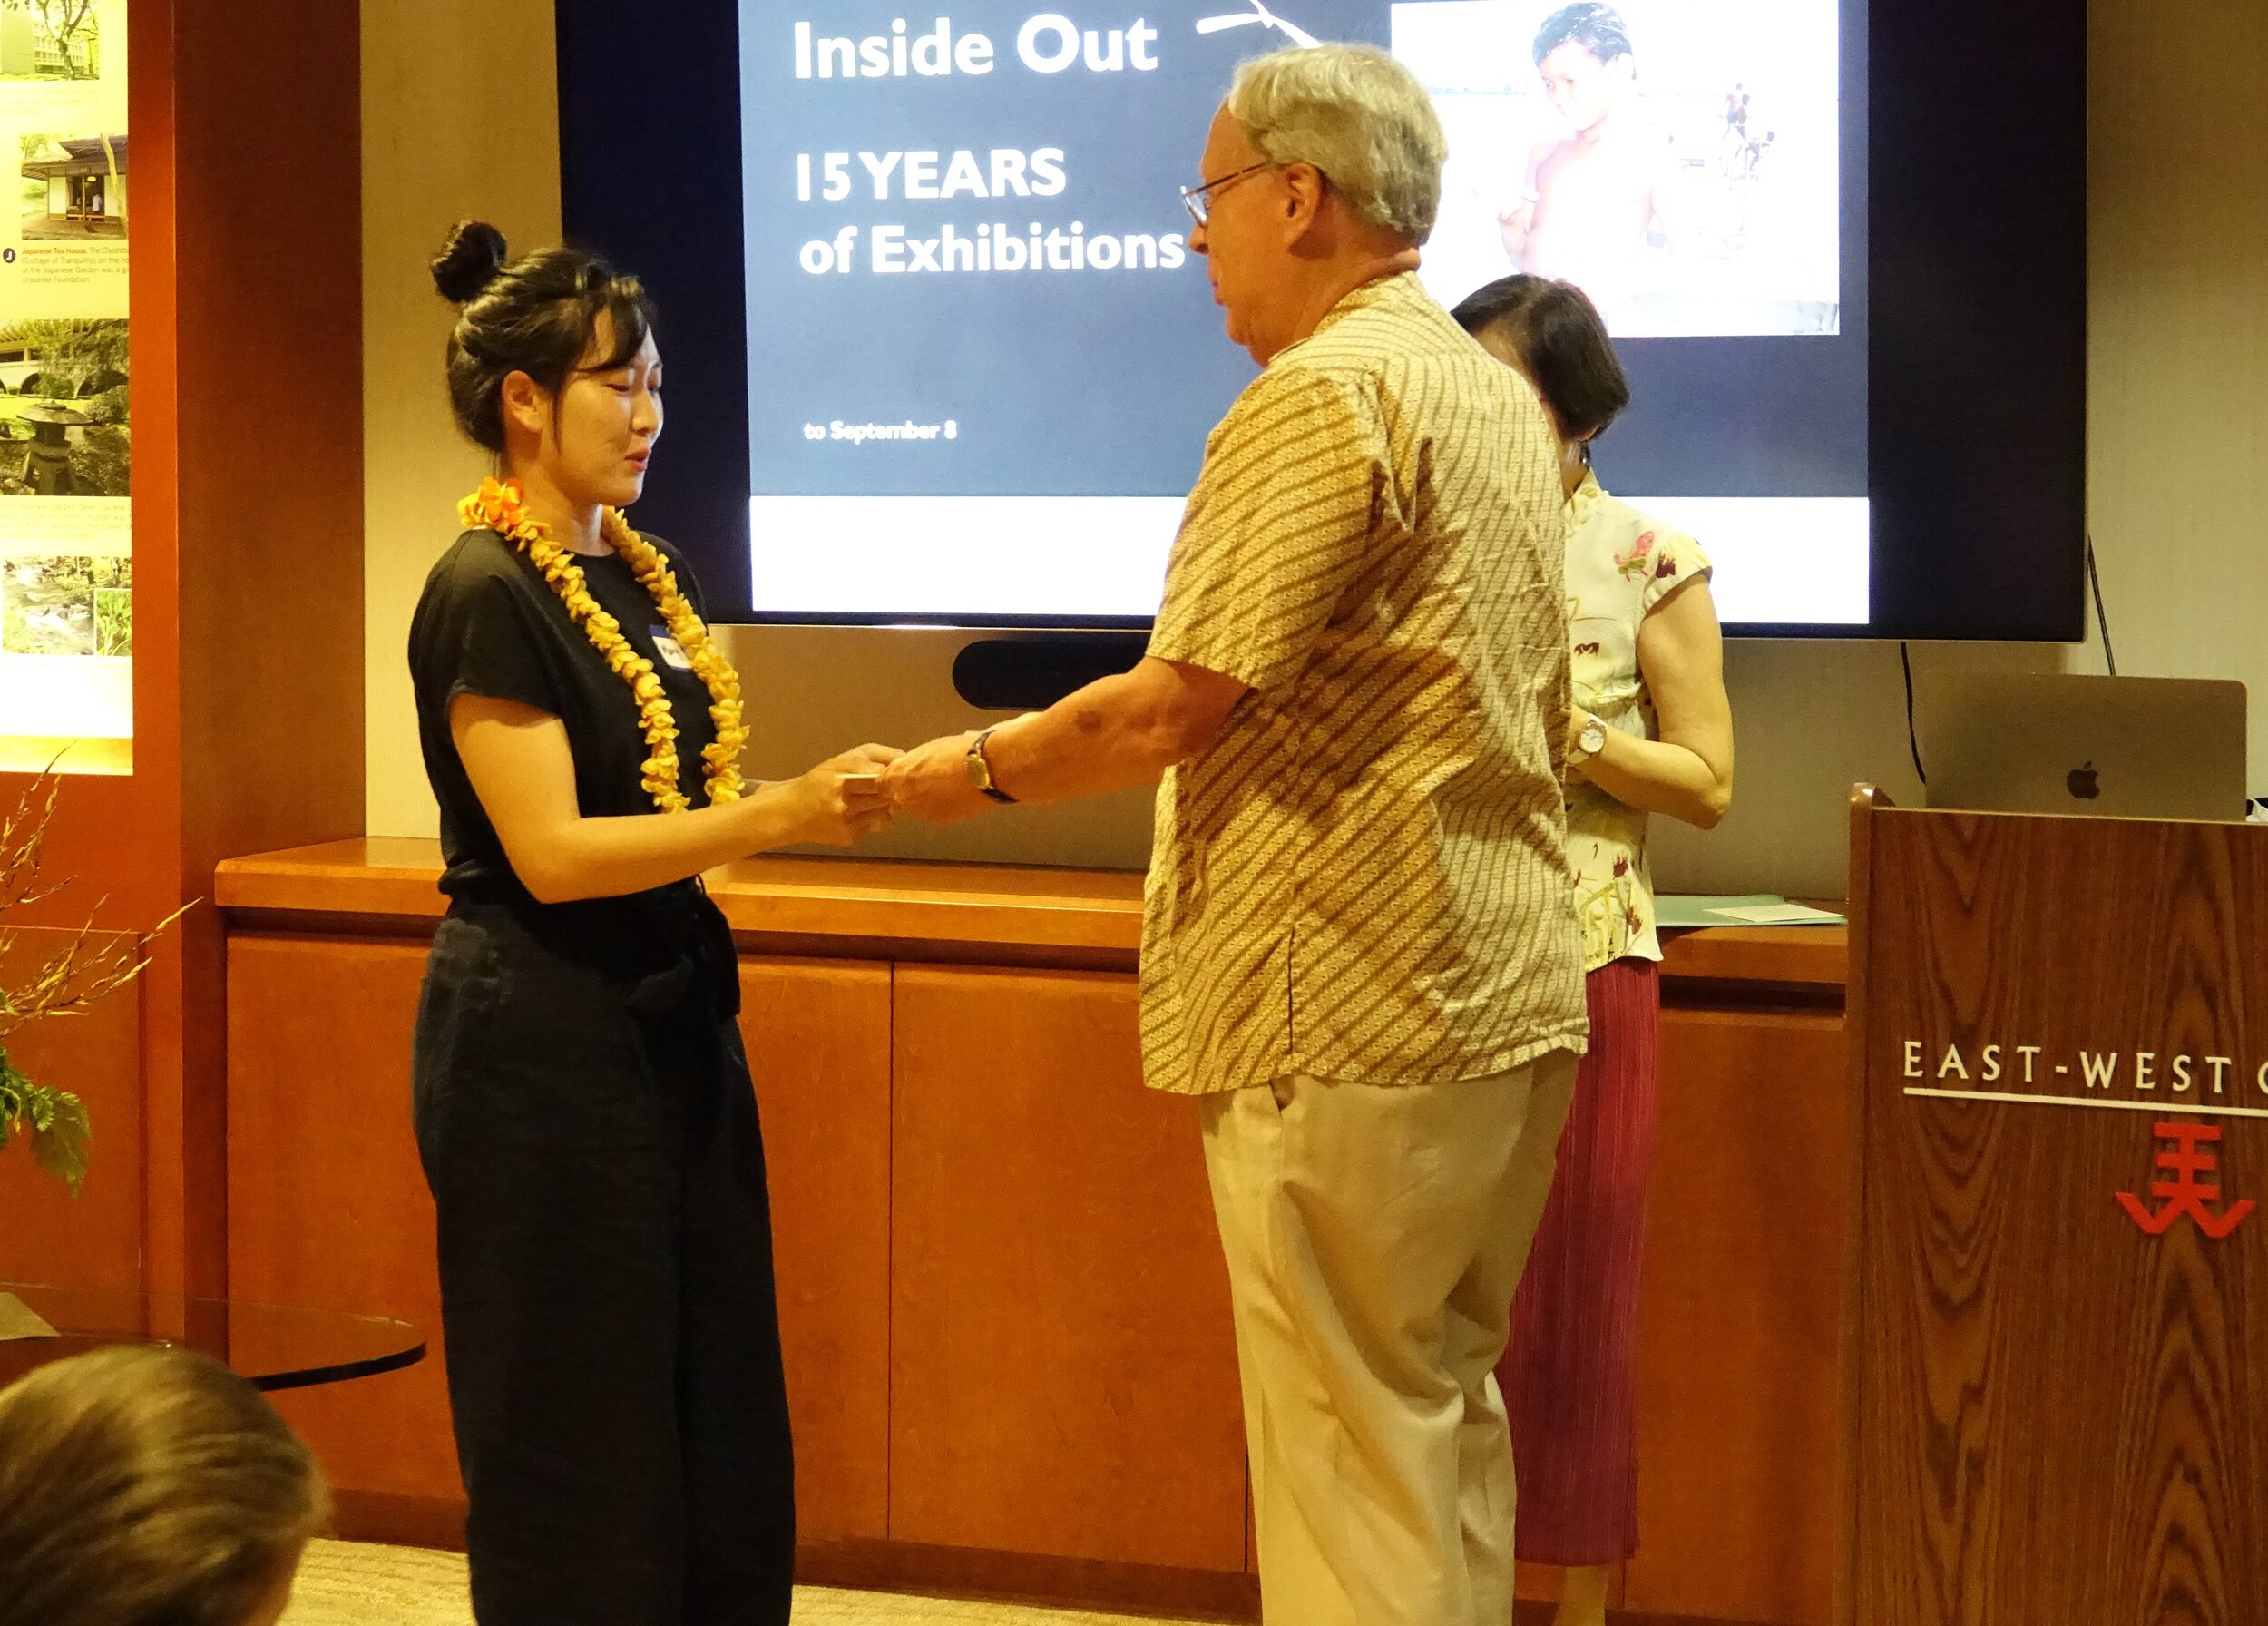  Miss Mary Kim received the Society's Susan Burghardt Special Award of $1,000 from Ambassador Raymond Burghardt for the 2019-2020 academic year. The award was to help her defray the material cost of her graduation project. Mary had a solo exhibition 